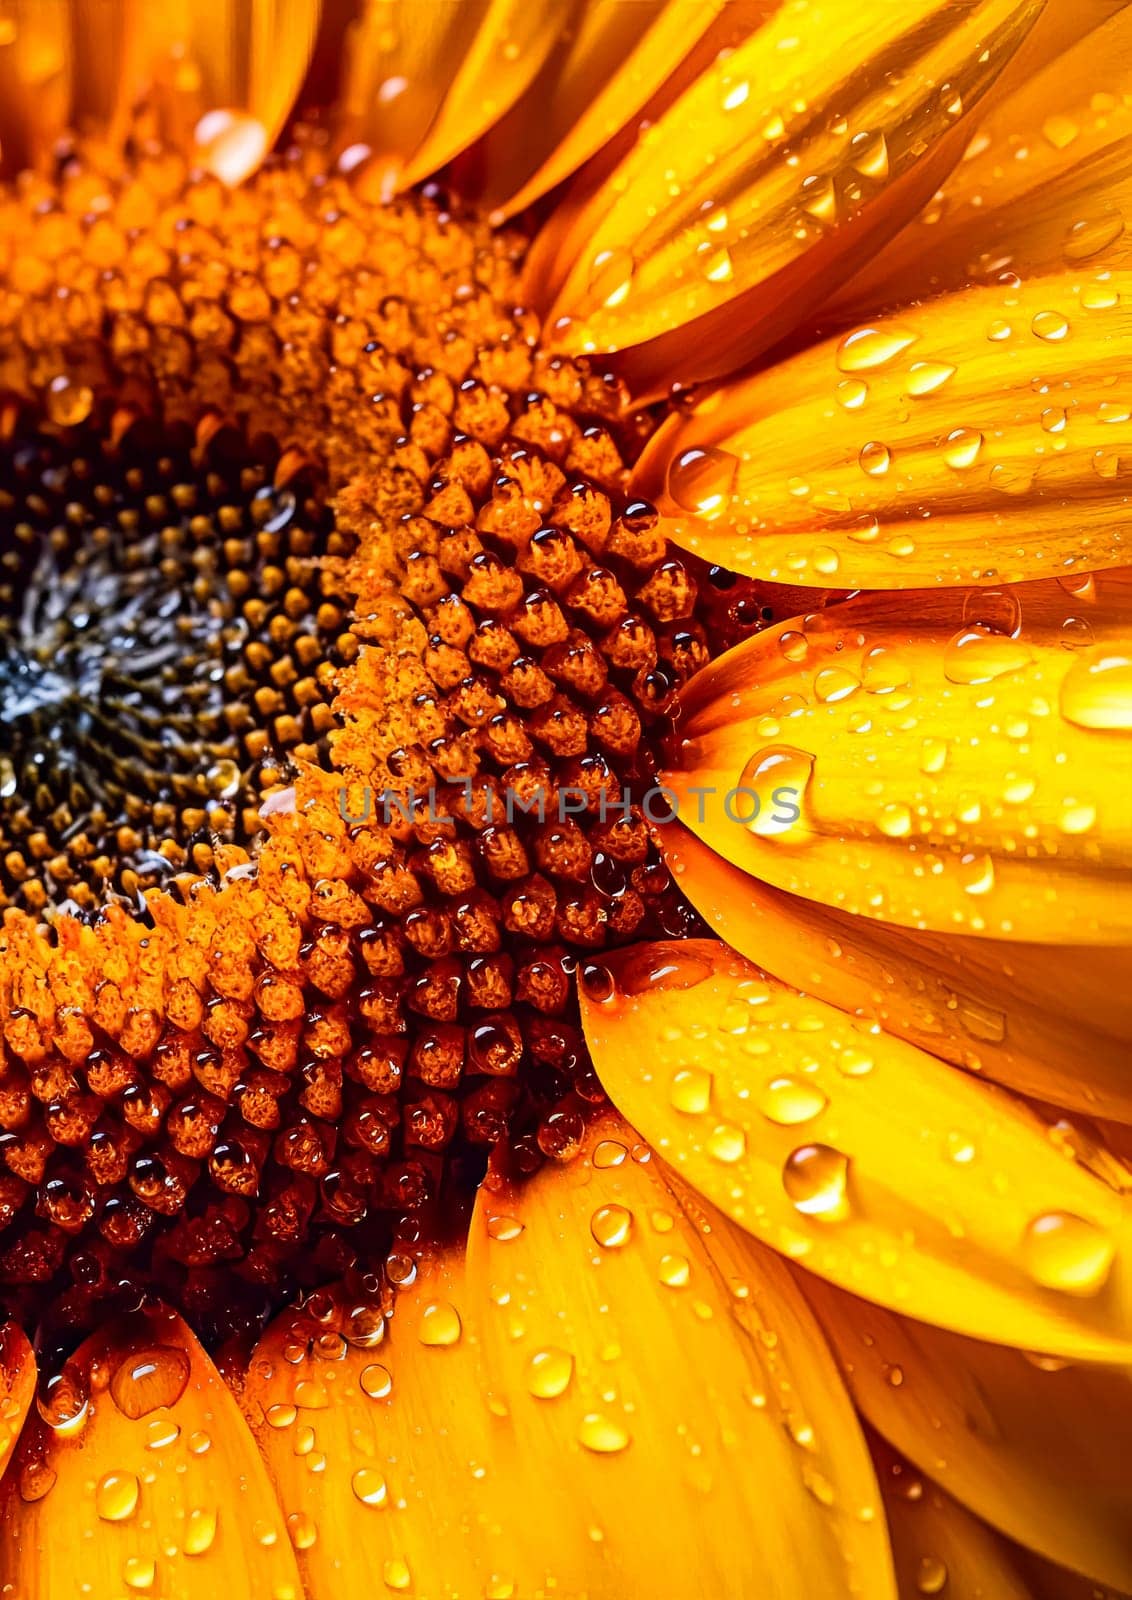 A close up of a yellow flower with water droplets on it. The droplets are scattered all over the flower, giving it a dreamy and ethereal appearance. The flower is the main focus of the image